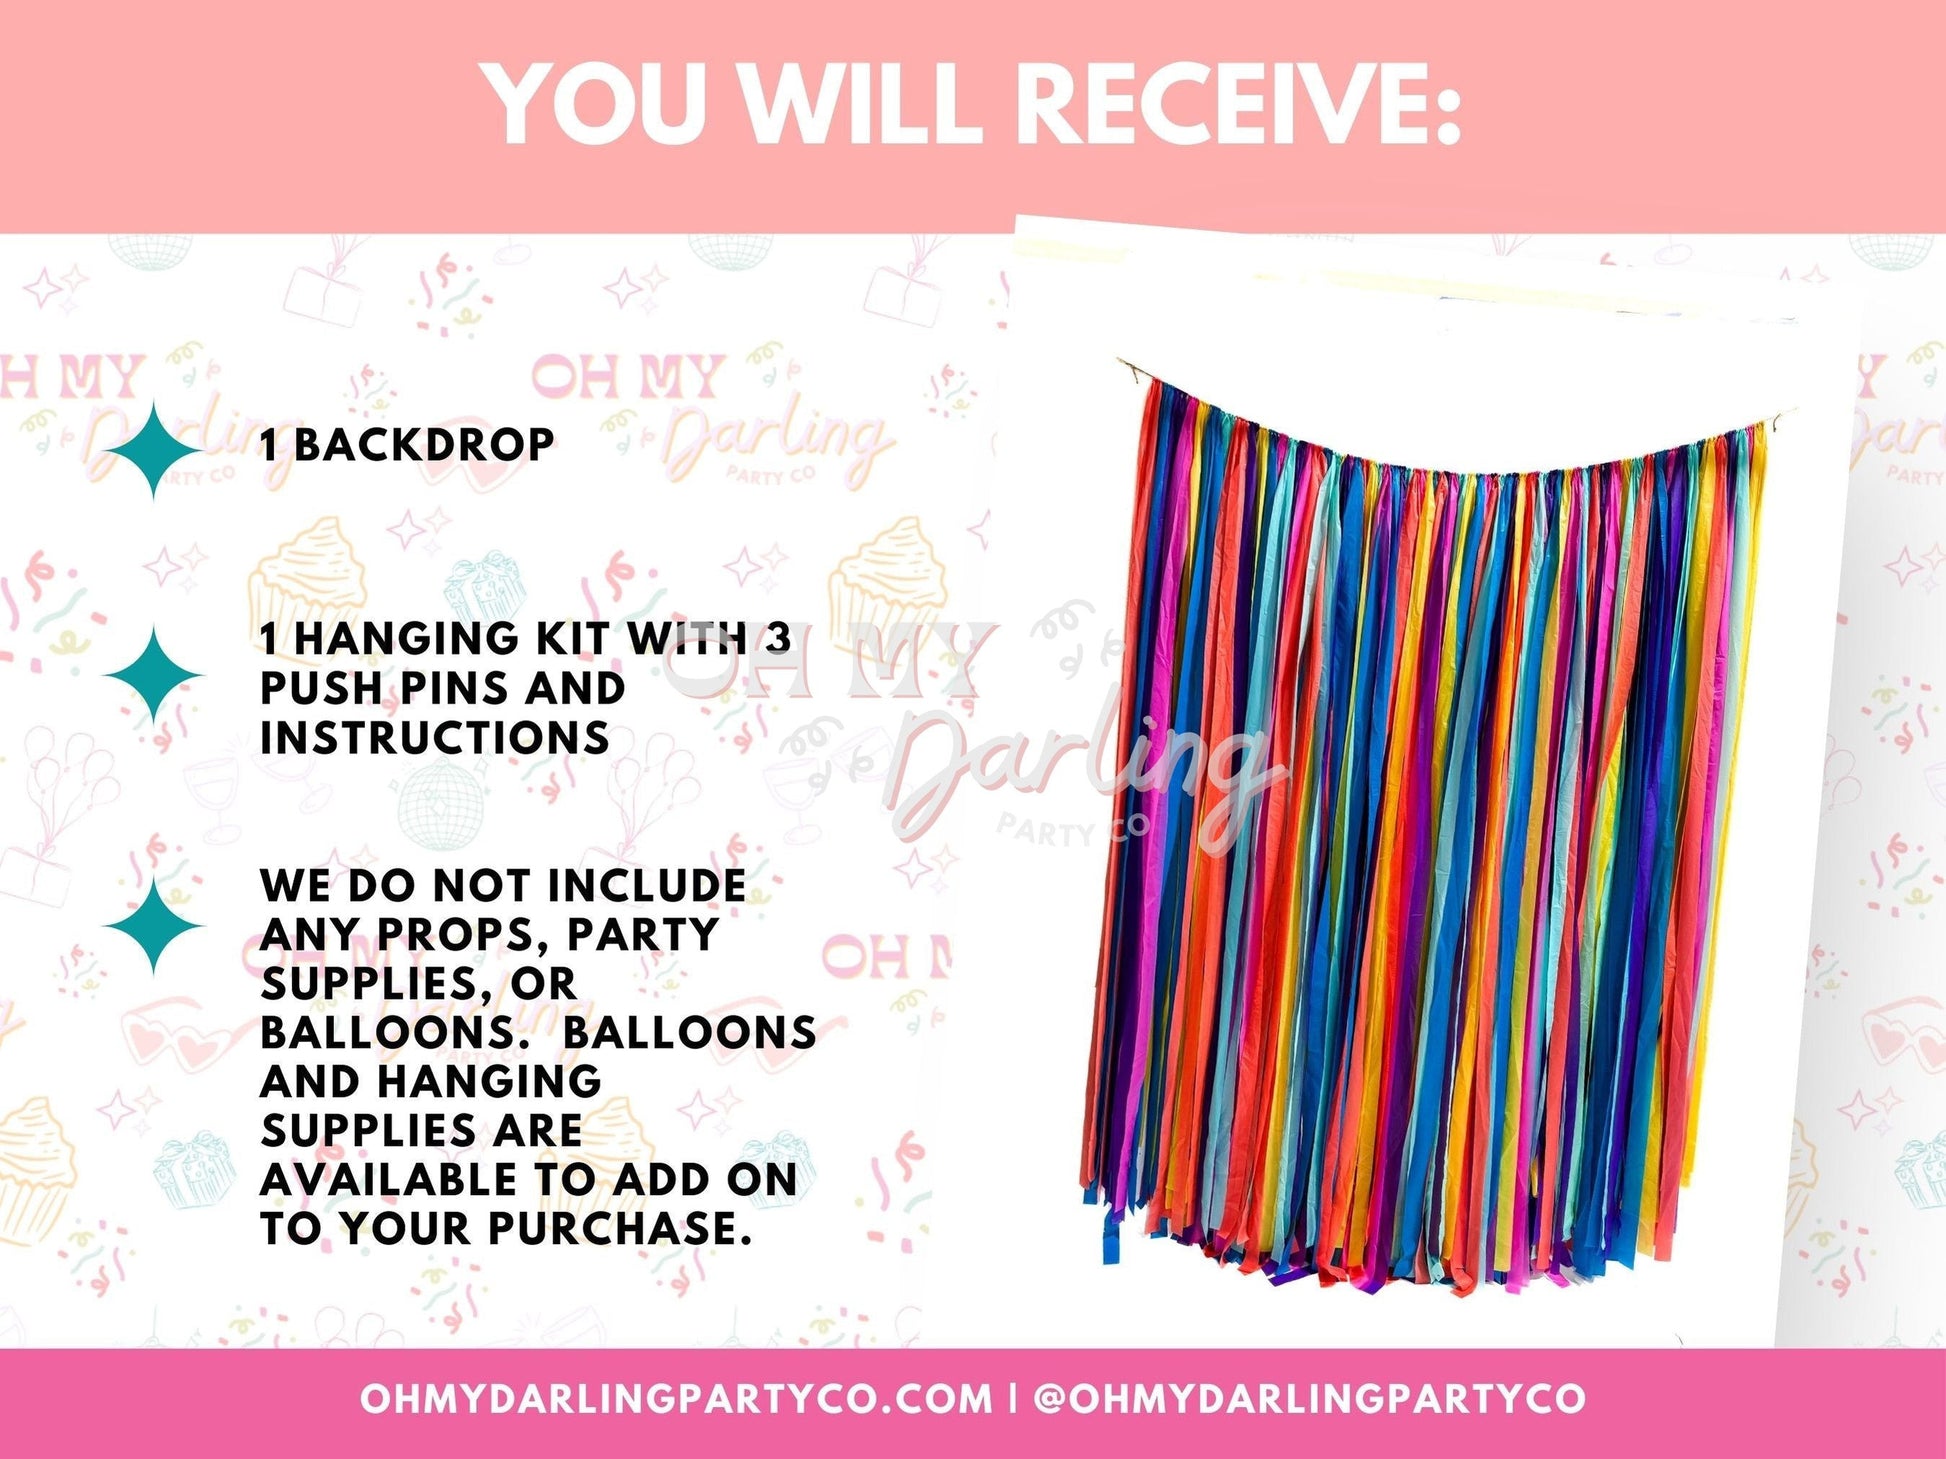 Tequila Sunrise Backdrop-Fringe Backdrop-Party Decor-Oh My Darling Party Co-Oh My Darling Party Co-bachelorette party, backdrops for party, balloon garlands, Birthday Party, boy party, cinco, cinco de mayo, colorful, engagement party, fiesta, fiesta collection, fiesta party, final fiesta, fringe backdrop, fringe garland, Fringe Streamers, girl party, gn party, last fiesta, mexican bachelorette, mexican fiesta, Mexico, mexico bachelorette, mexico celebration, new years party, OMDPC, party backdrops, party de